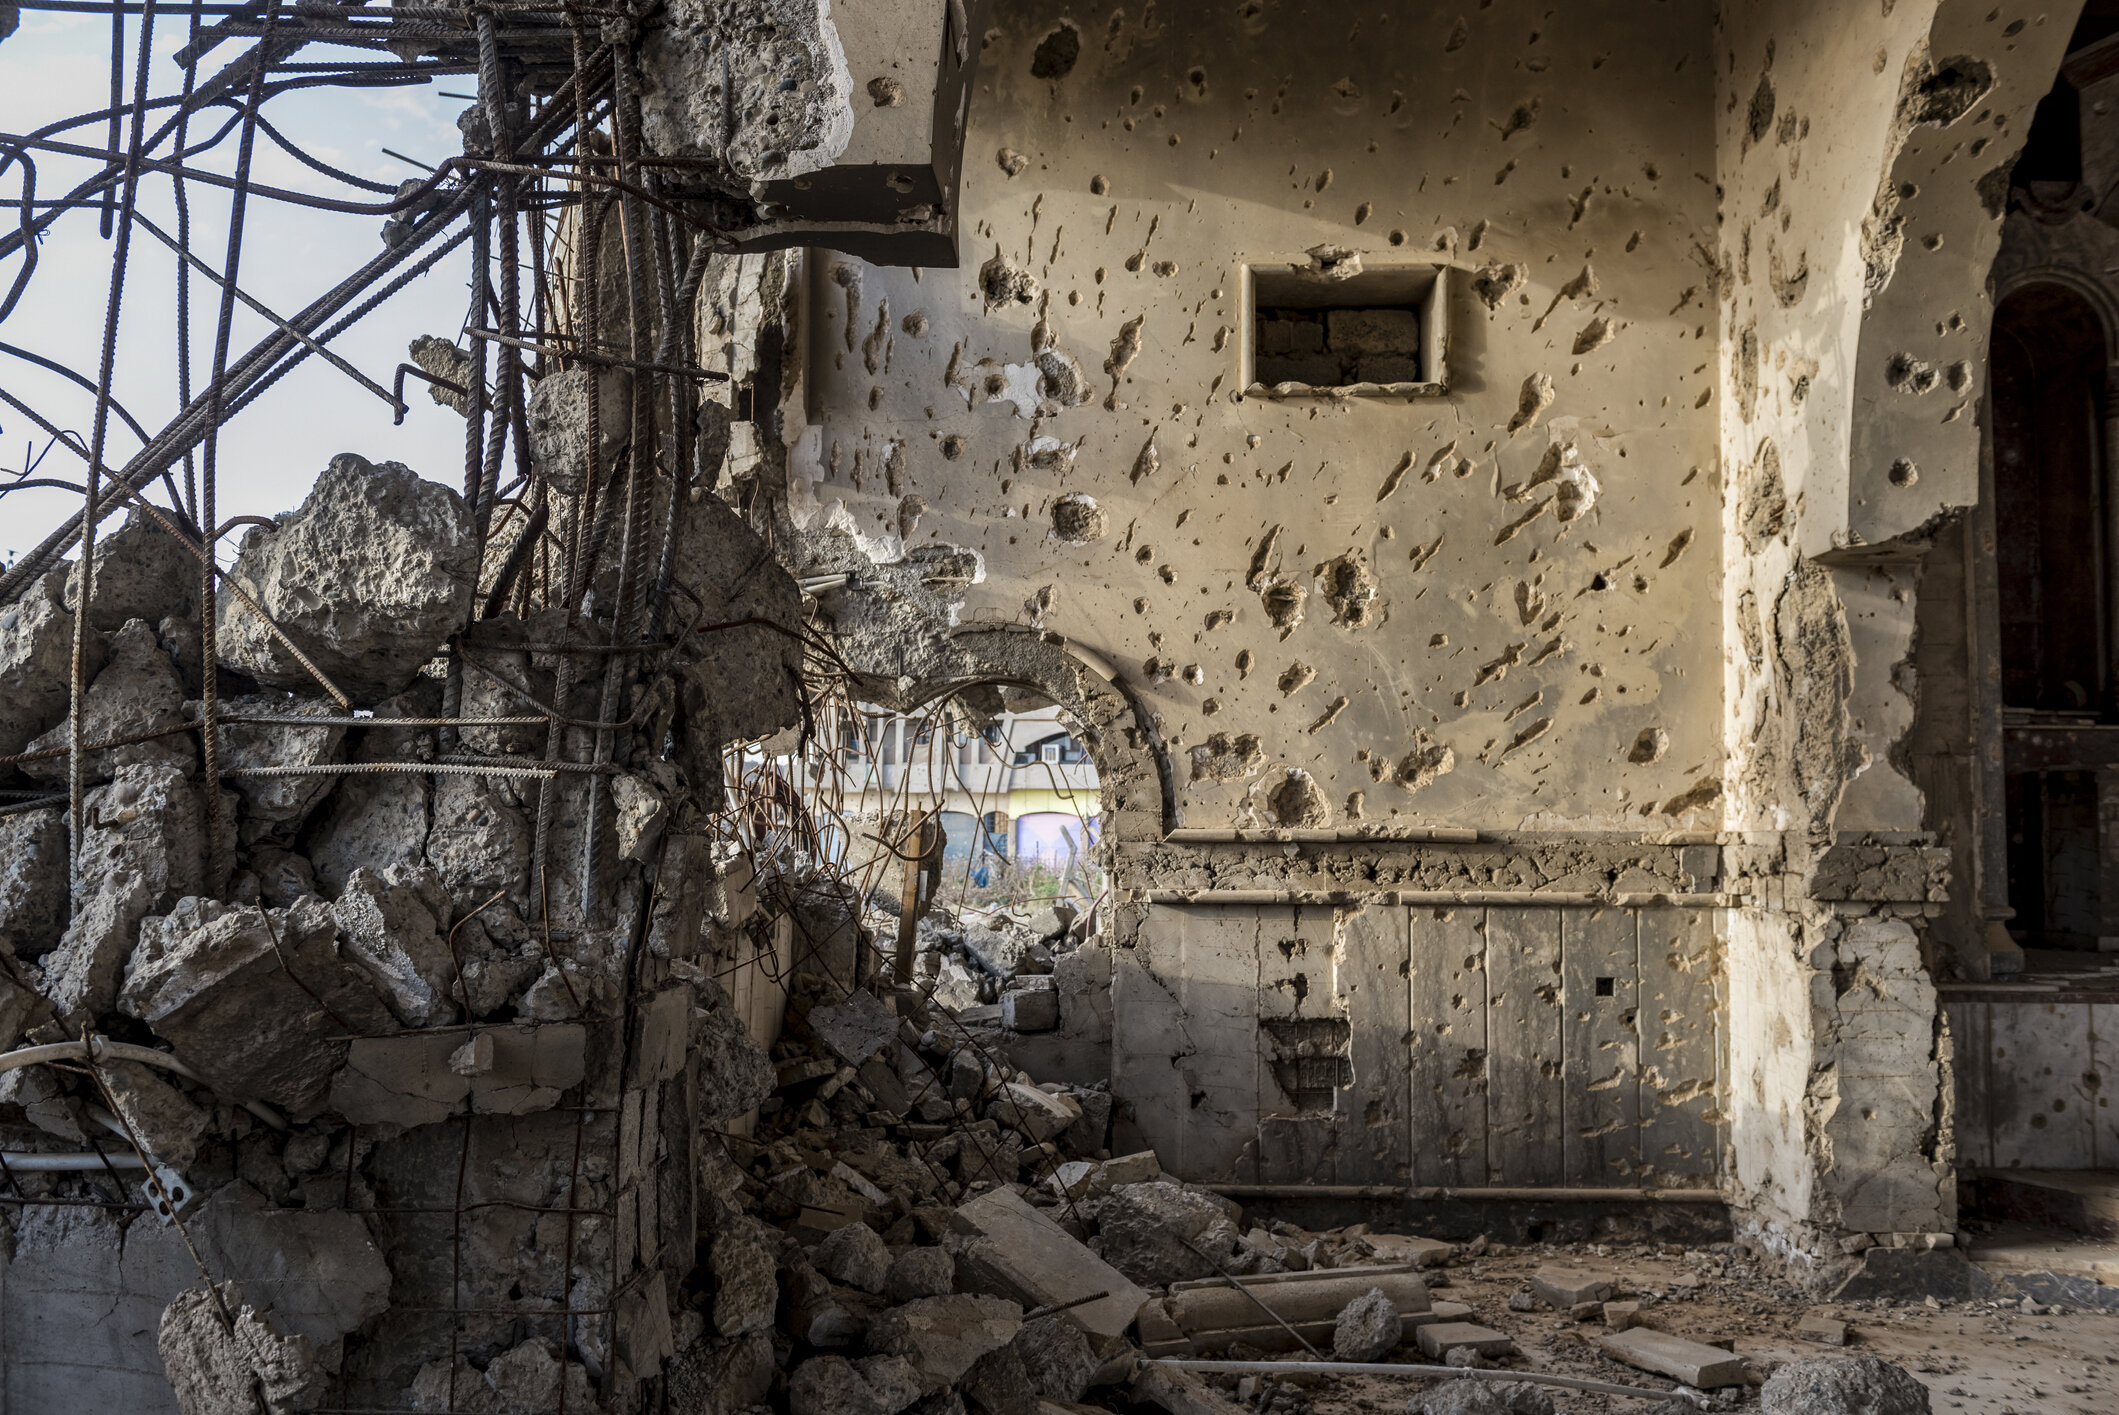 Destroyed Armenian church in Mosul, Iraq (photo: Getty Images).